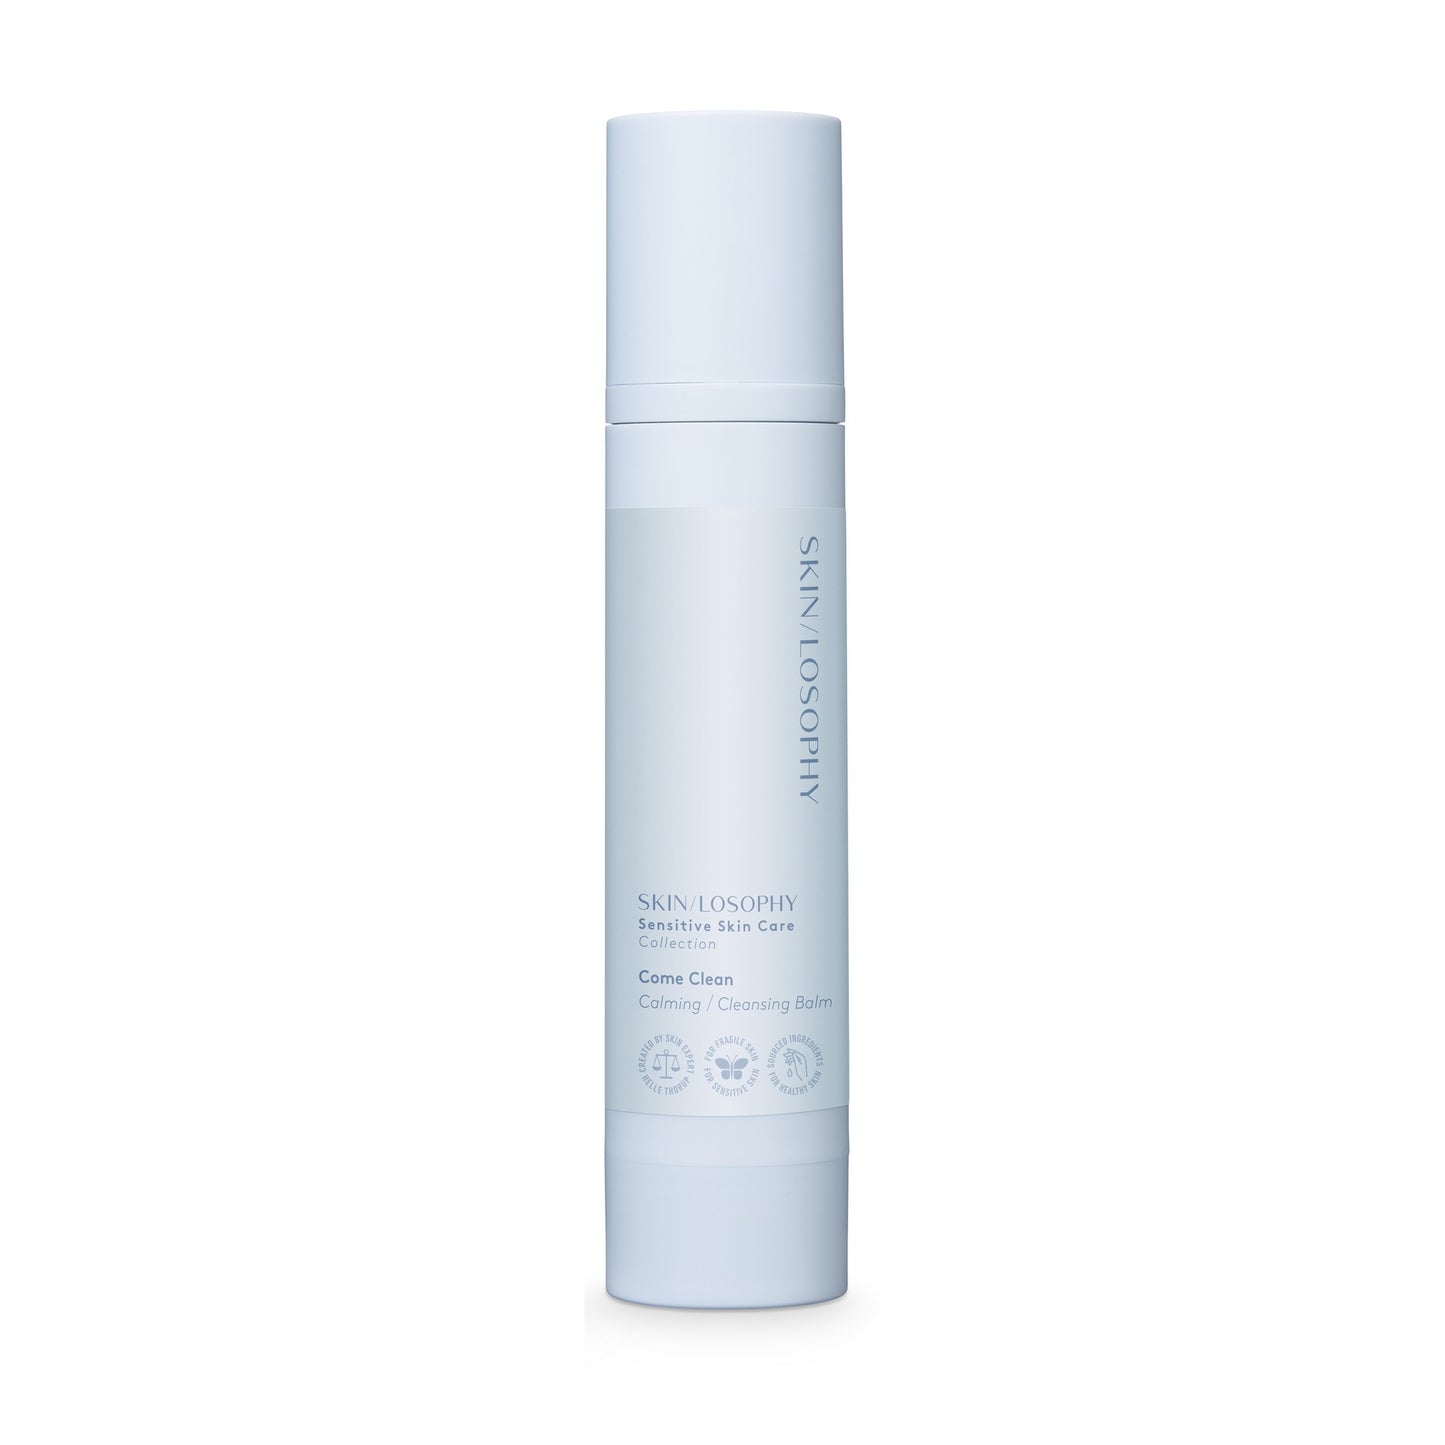 SKIN/LOSOPHY COME CLEAN - CALMING CLEANSING BALM - 120 ML